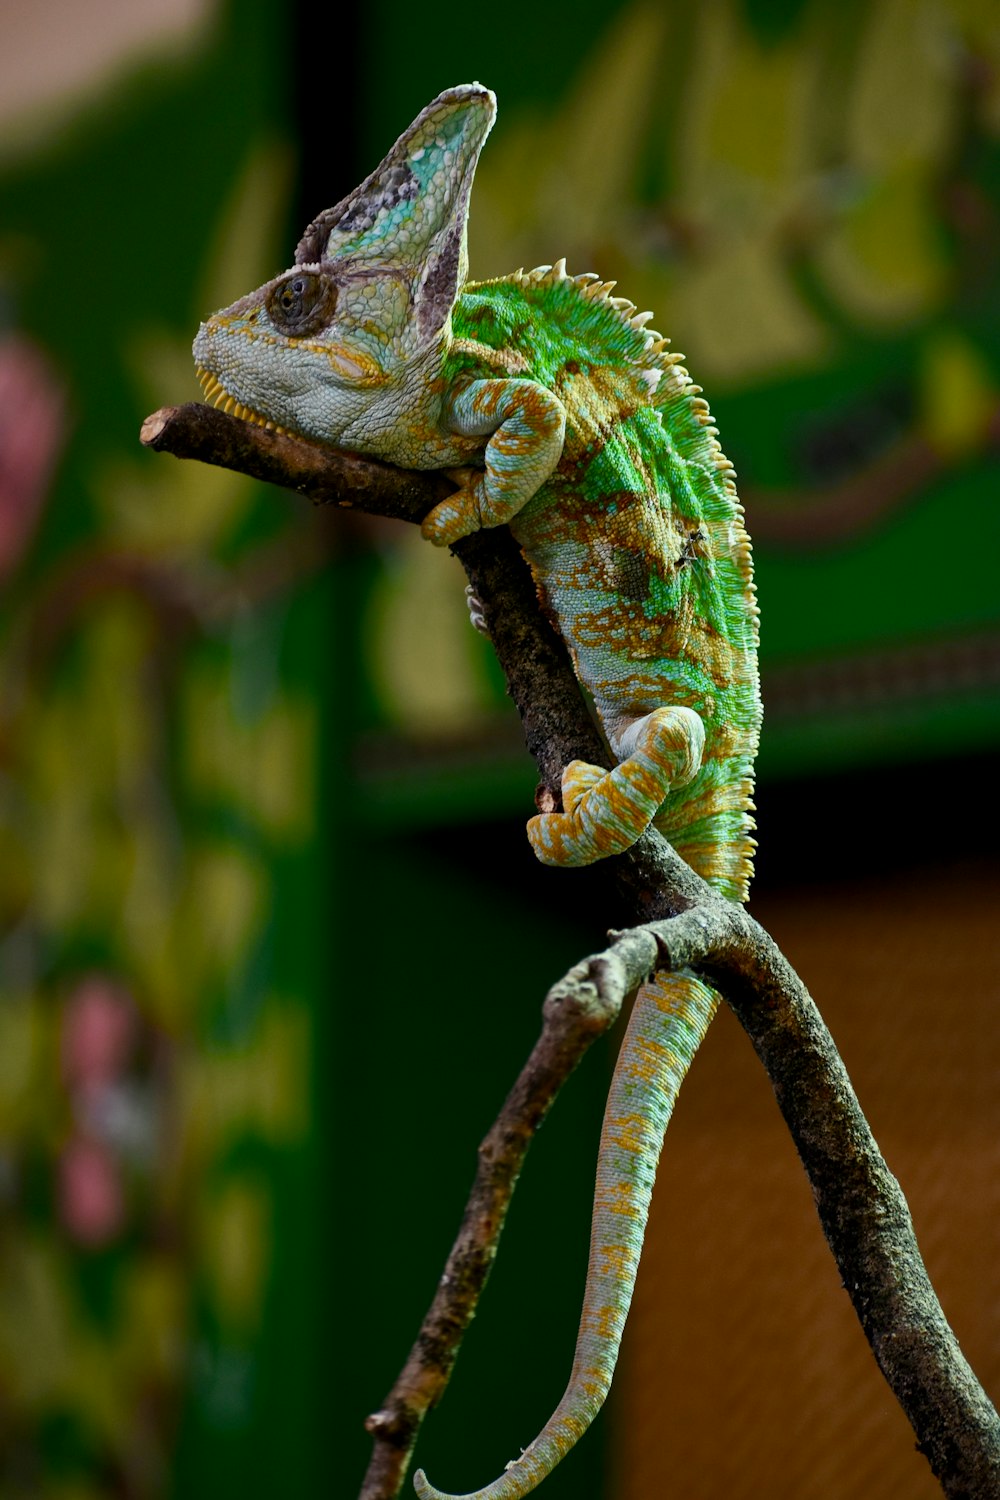 green and gray chameleon on tree branch